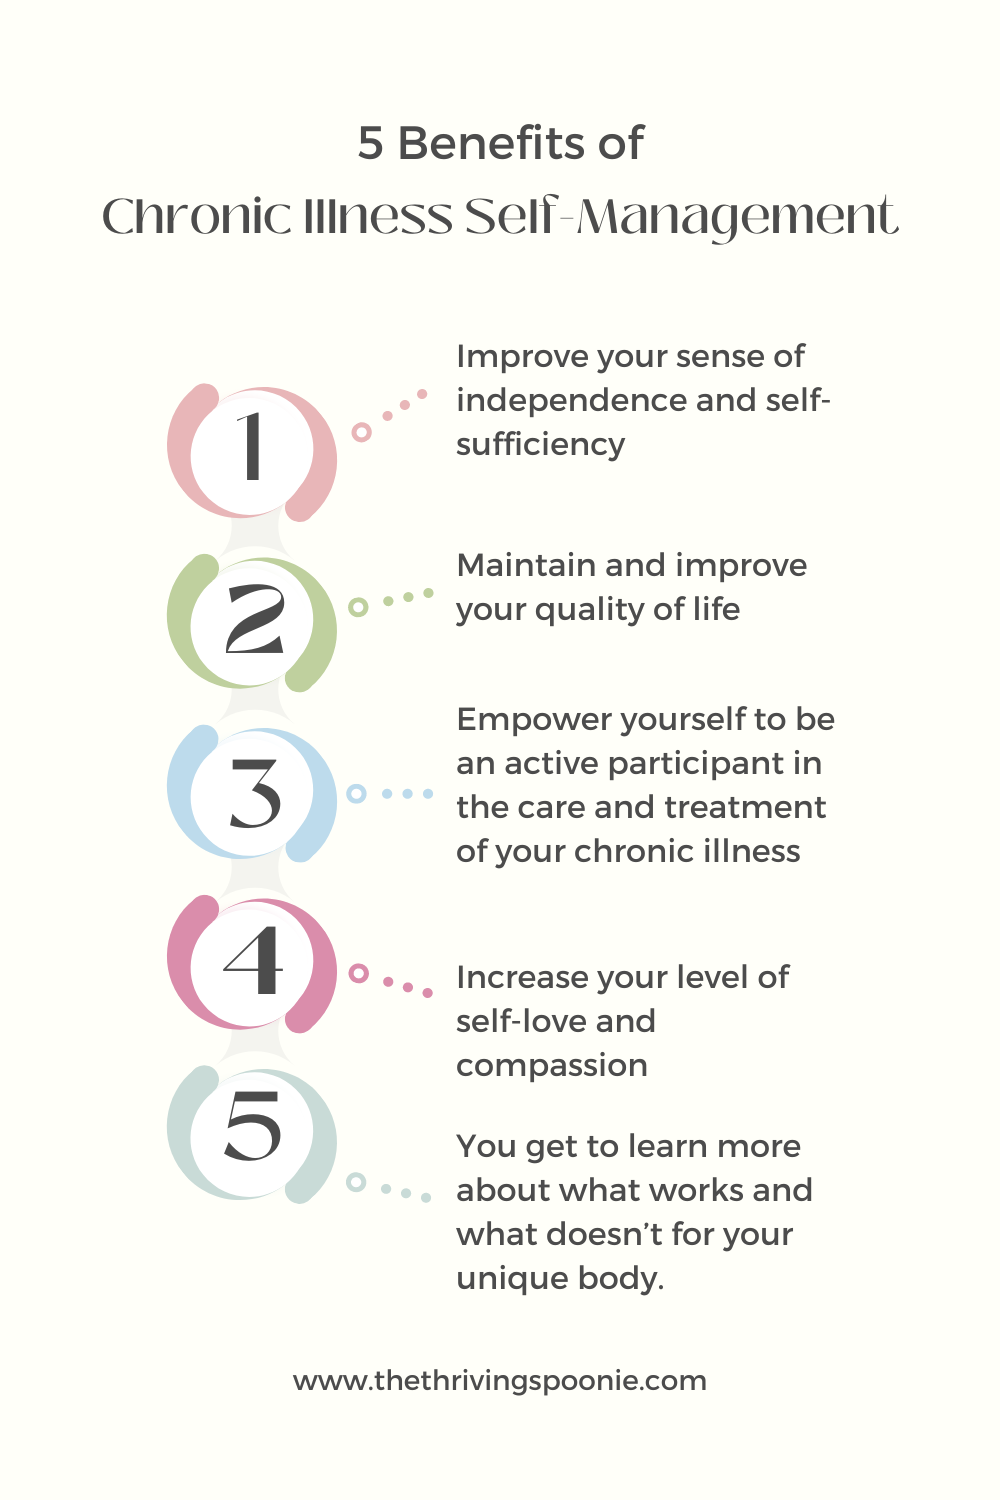 5 Ways to Empower Yourself with Chronic Illness Listicle